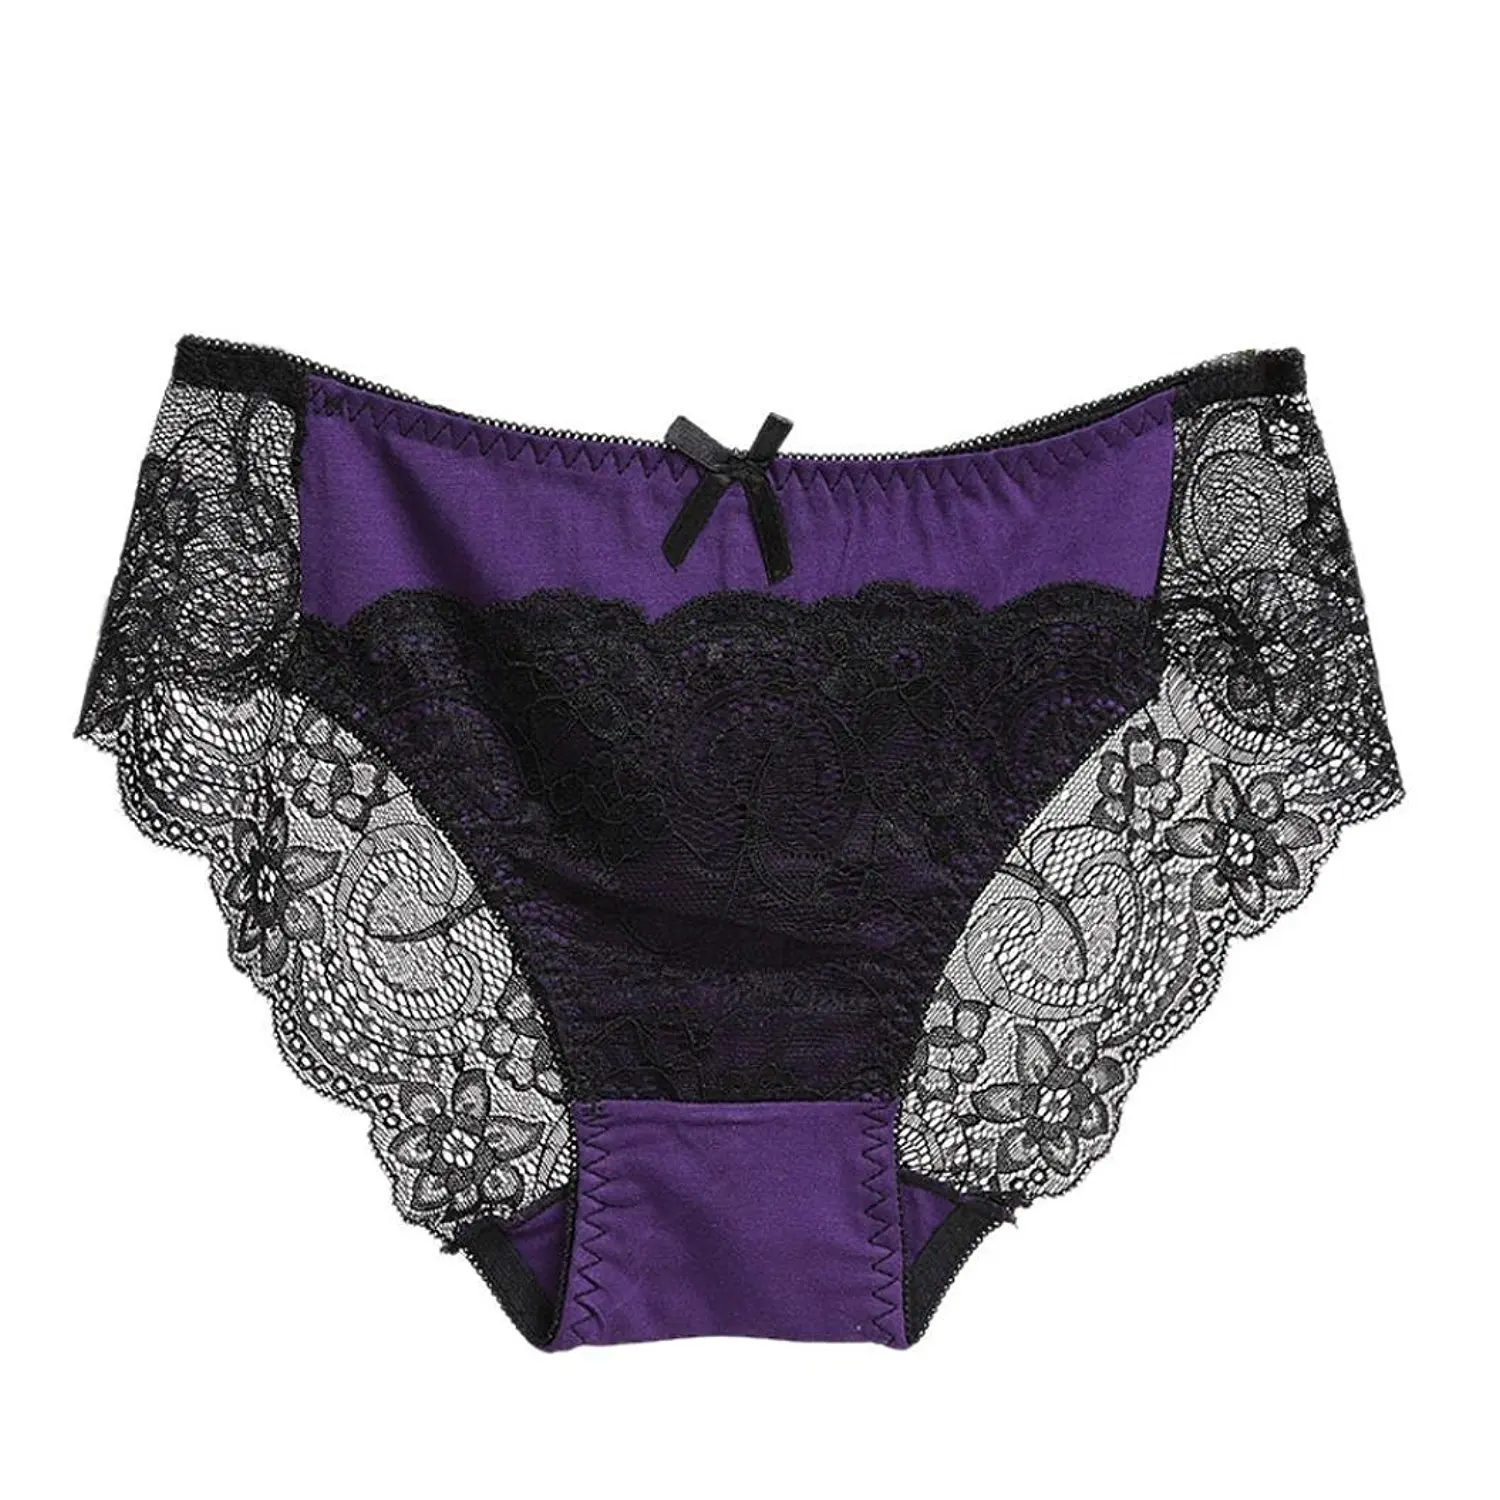 Cheap Hipsters Panty, find Hipsters Panty deals on line at Alibaba.com